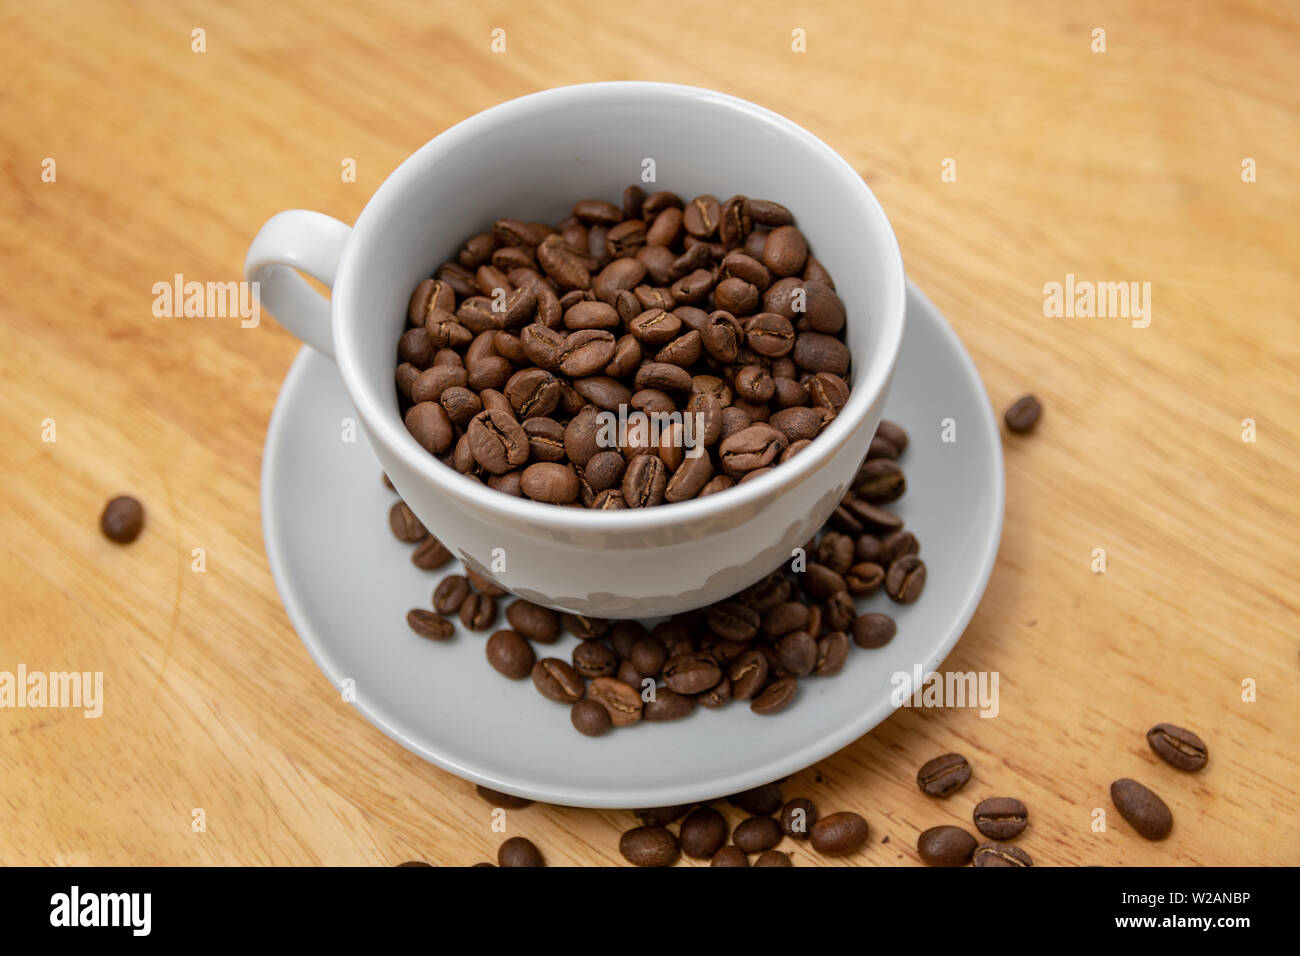 Coffee Beans in a Cup and Saucer on a Wooden Table Stock Photo